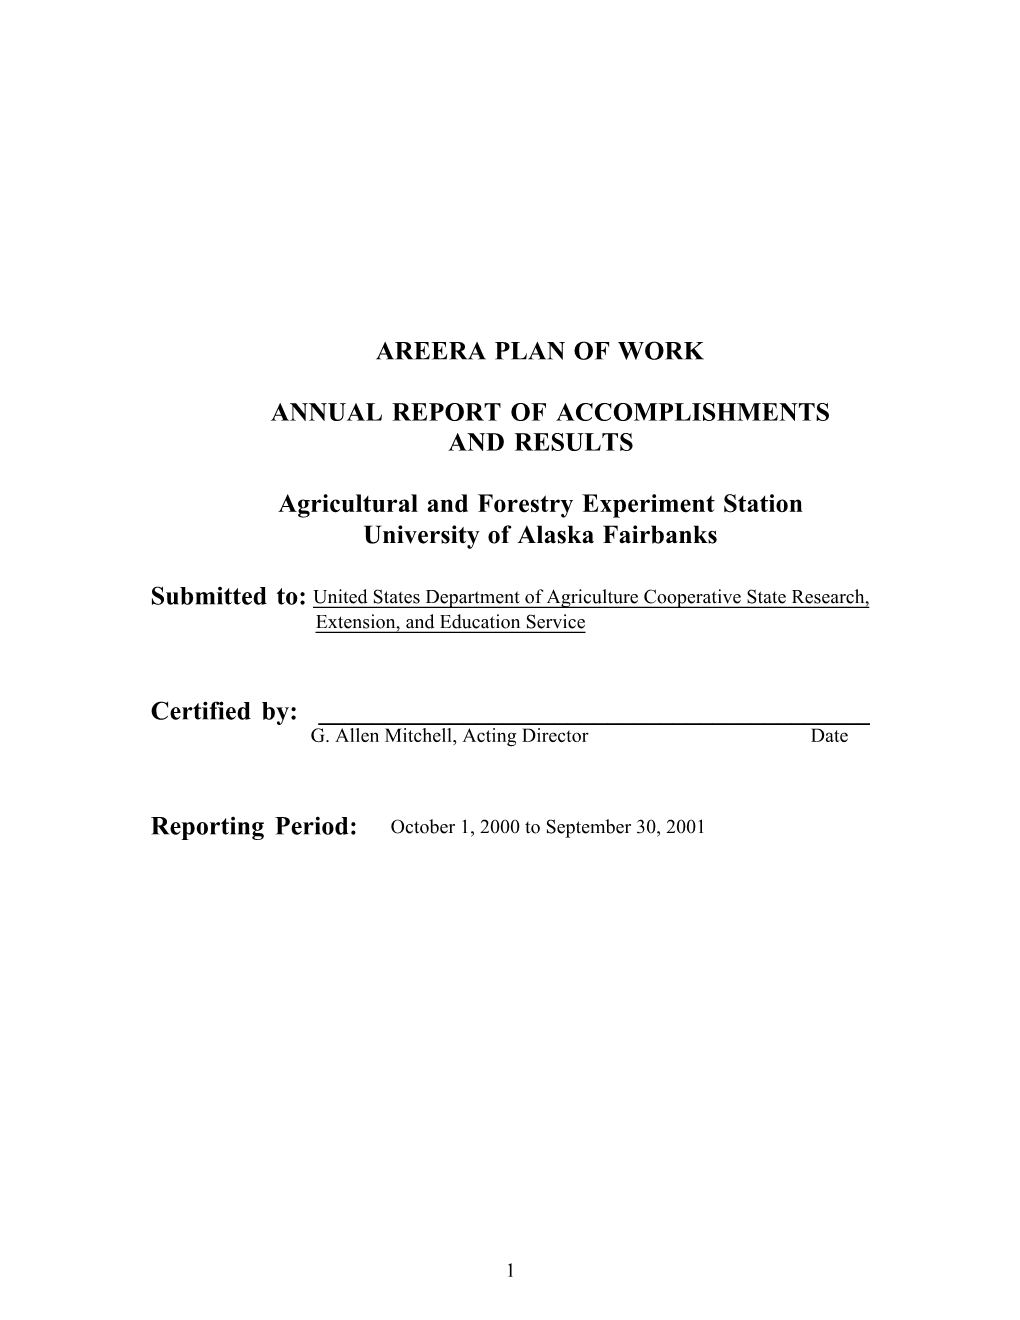 Areera Plan of Work Annual Report Of